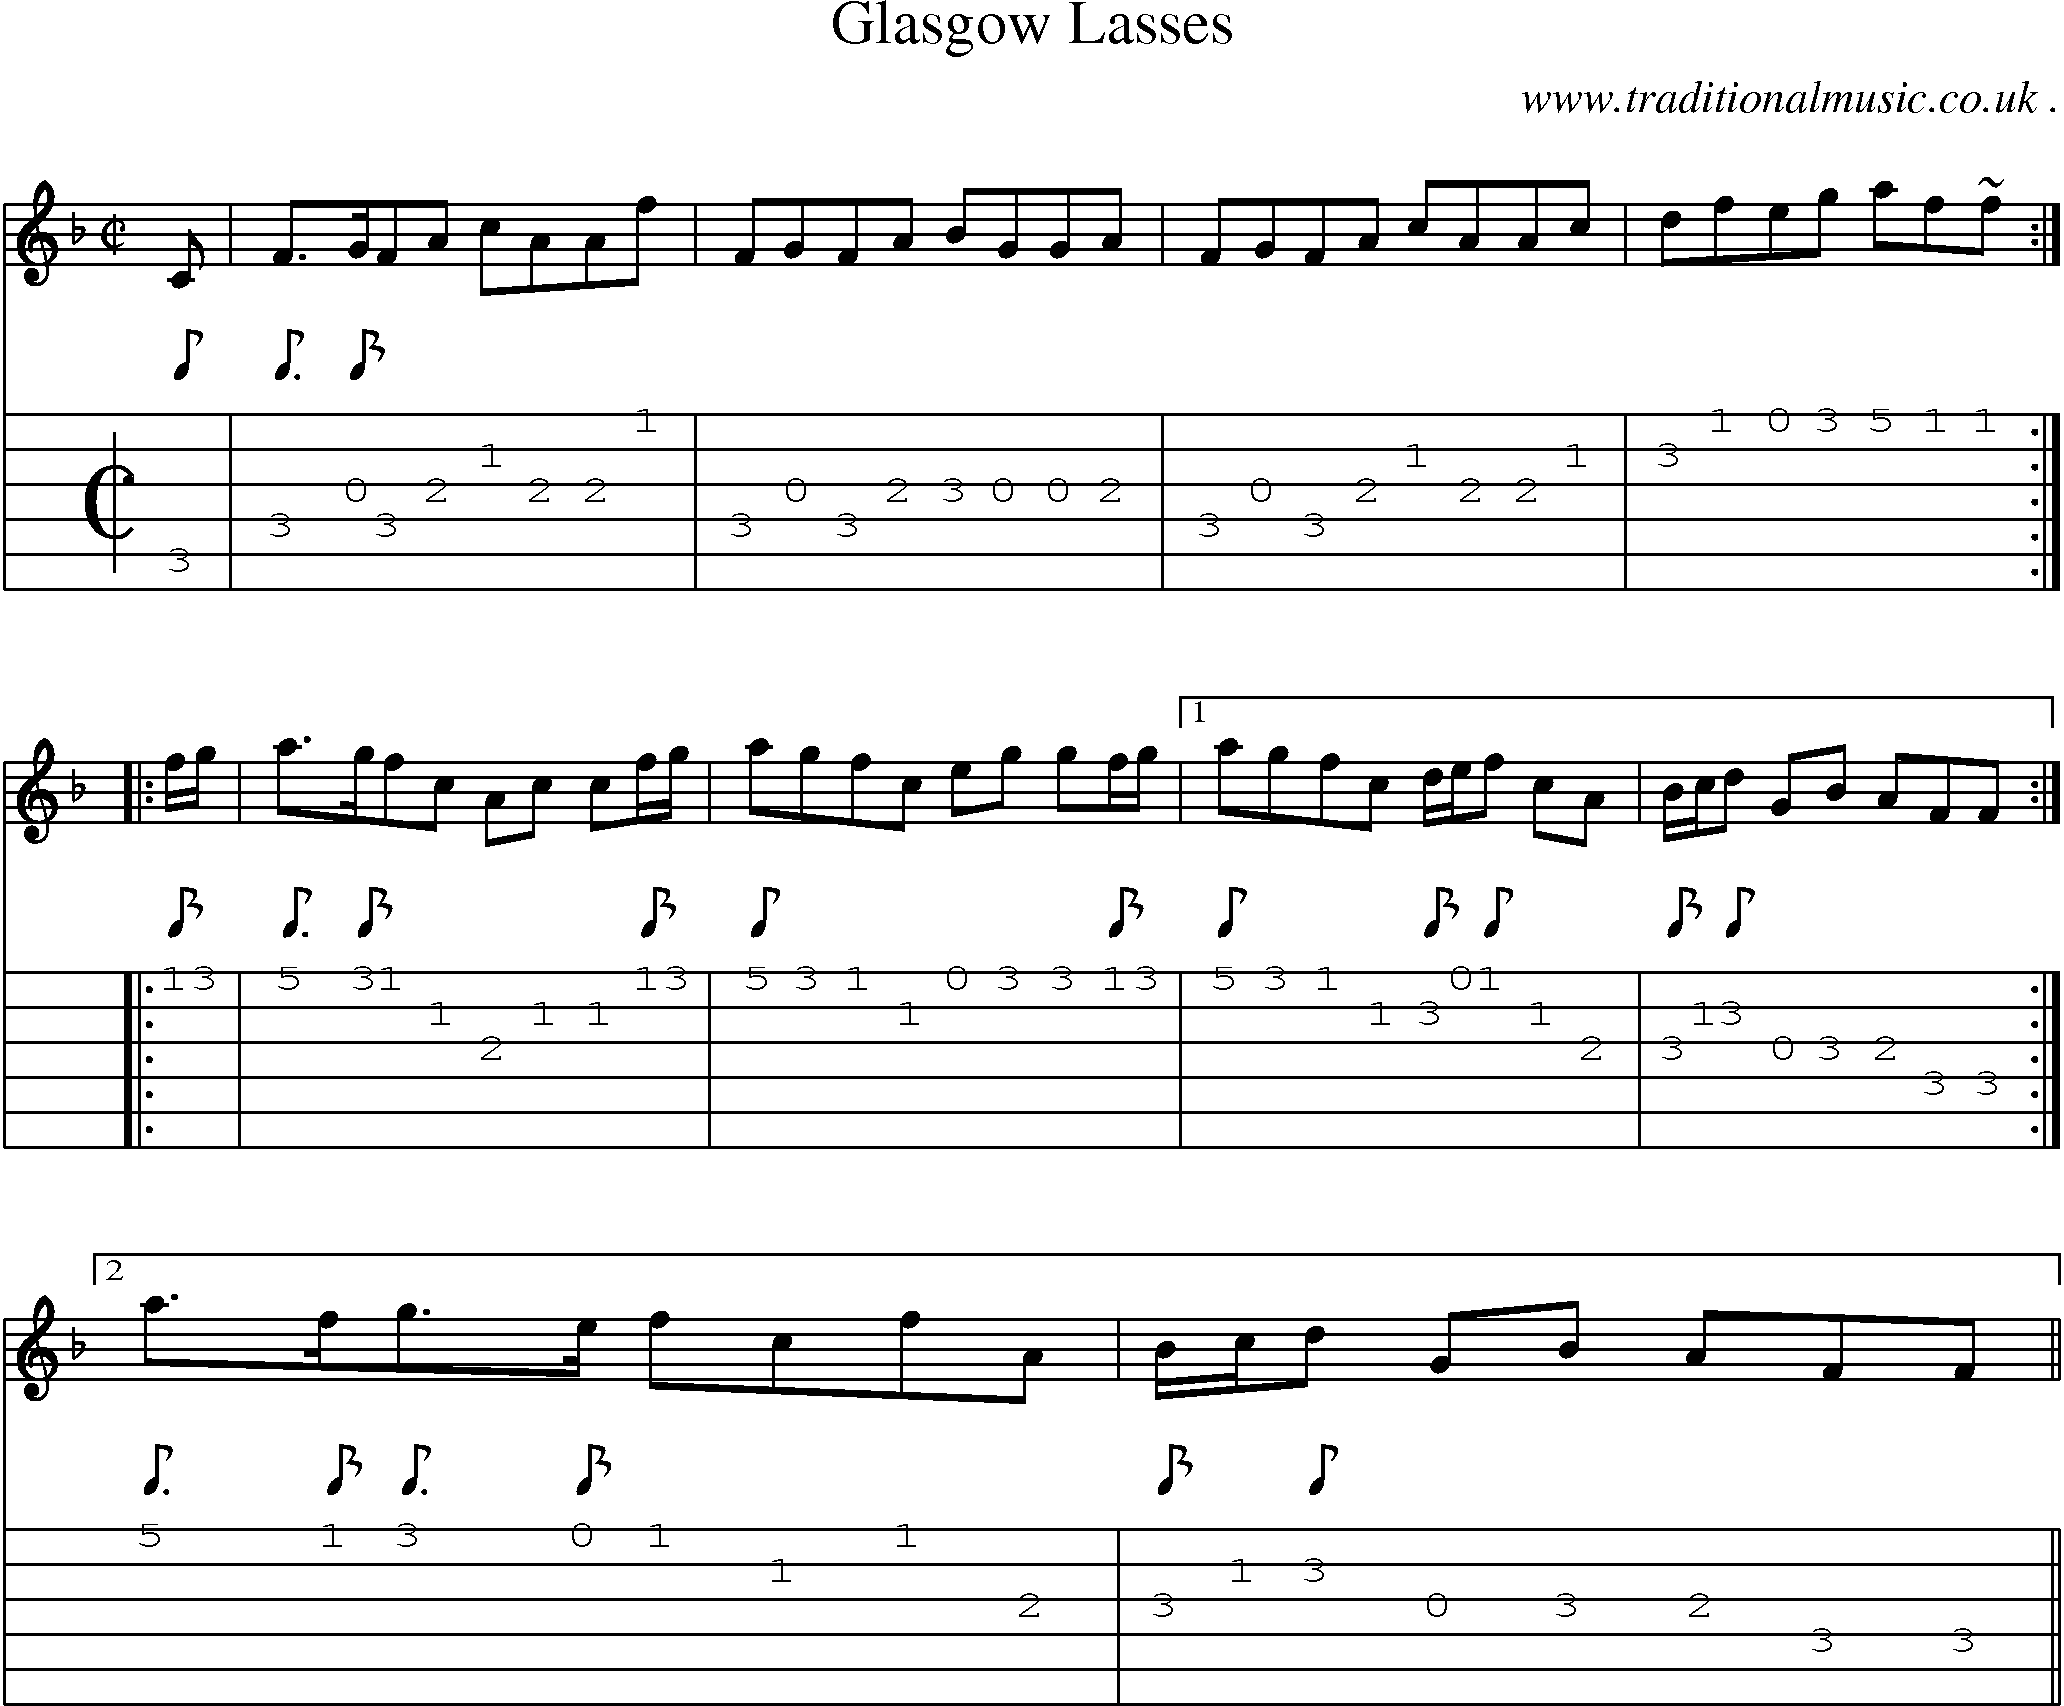 Sheet-music  score, Chords and Guitar Tabs for Glasgow Lasses